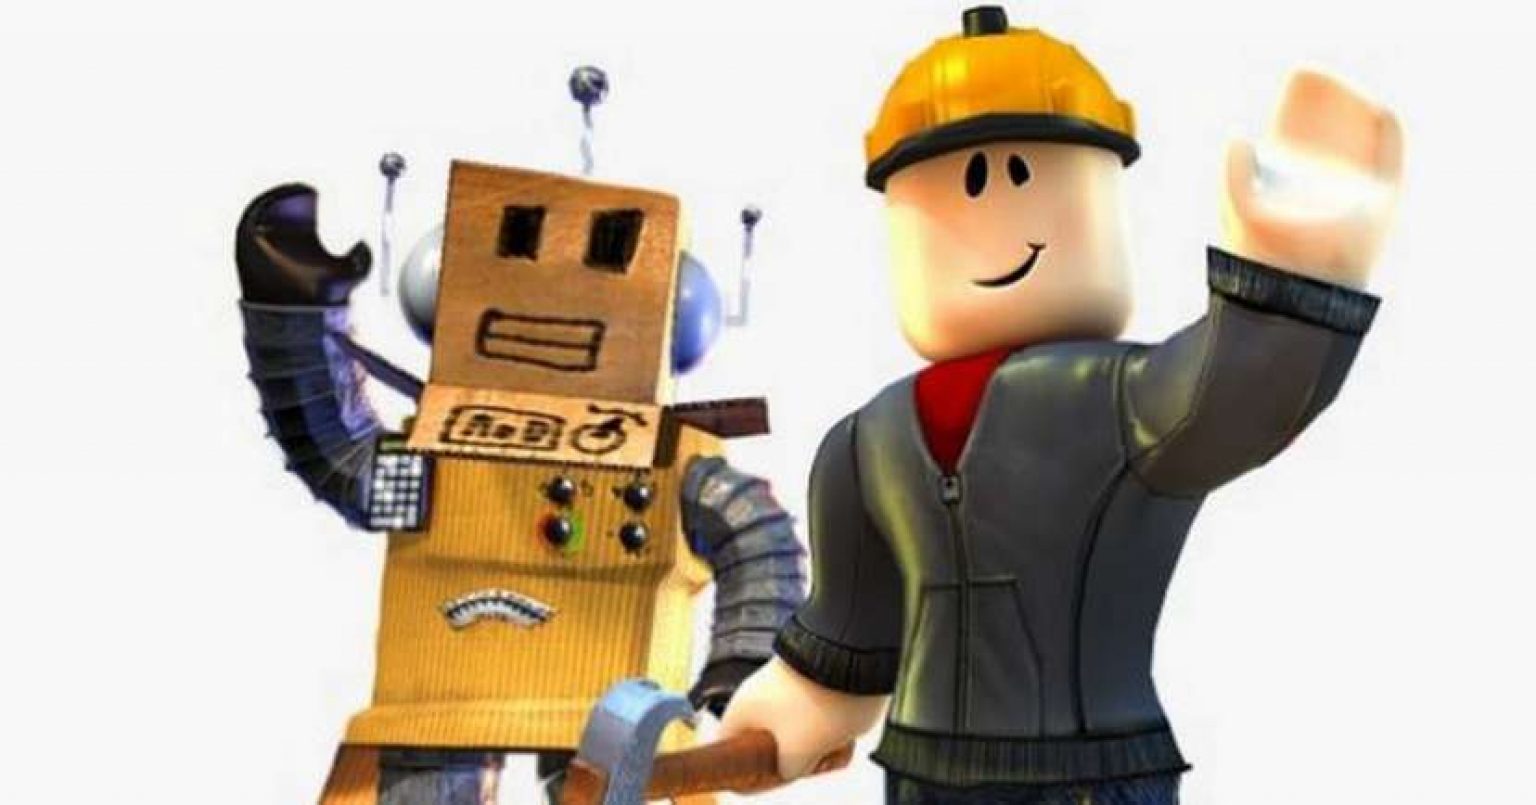 roblox pc game free download